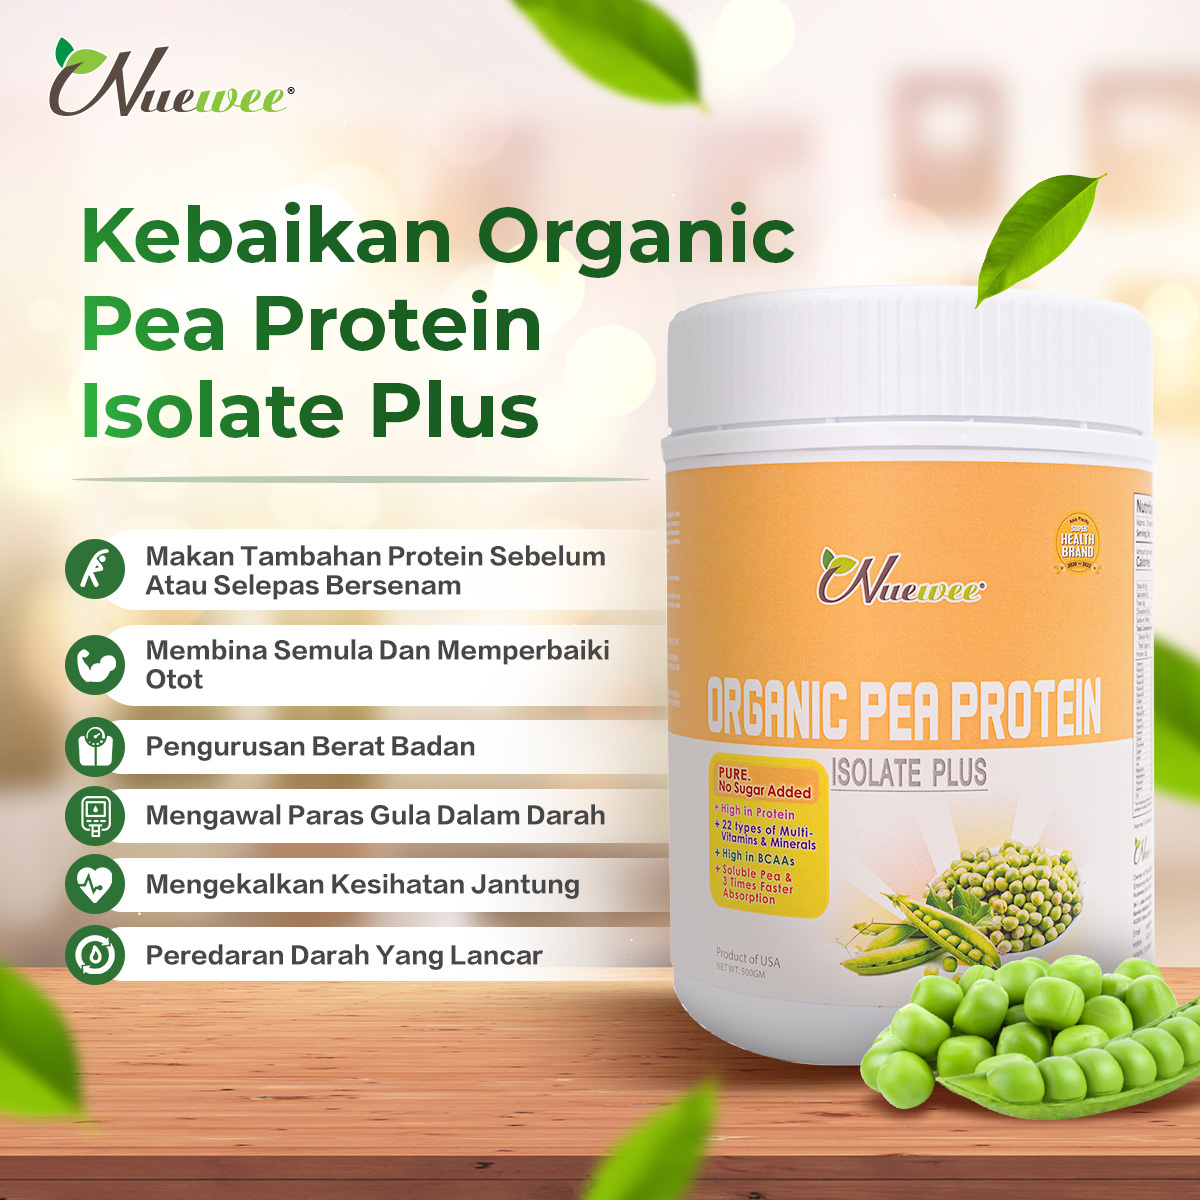 Benefits-of-Nuewee-Organic-Pea-Protein-Isolate-Plus